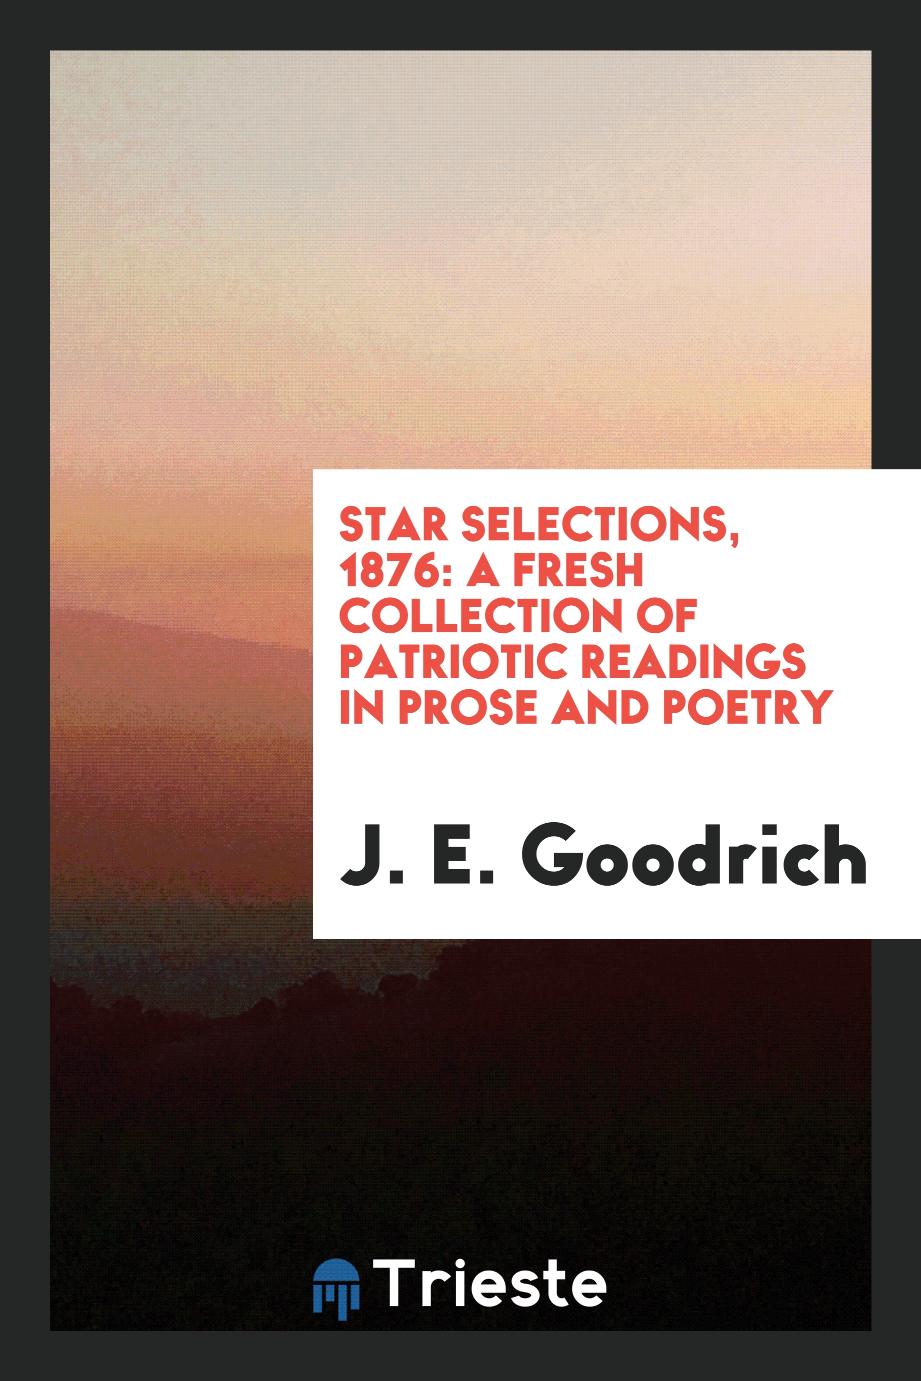 Star Selections, 1876: A Fresh Collection of Patriotic Readings in Prose and Poetry